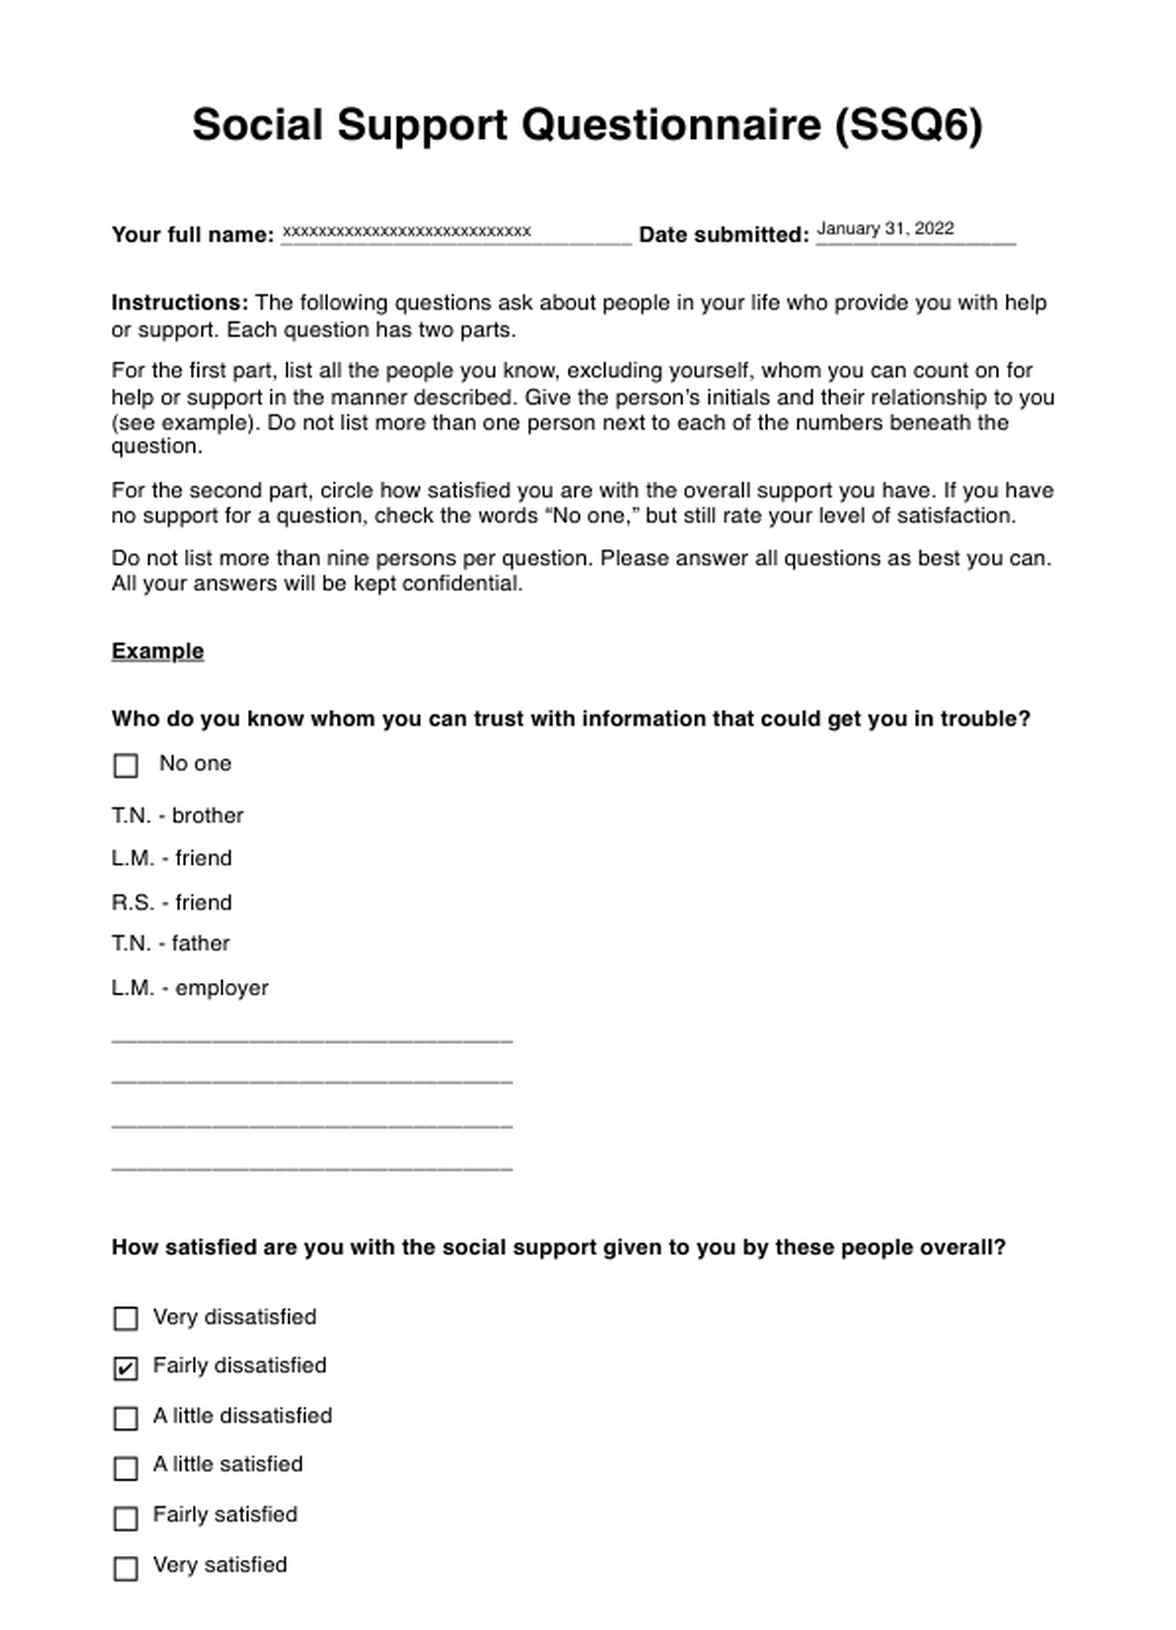 Social Support Questionnaire (SSQ6) PDF Example